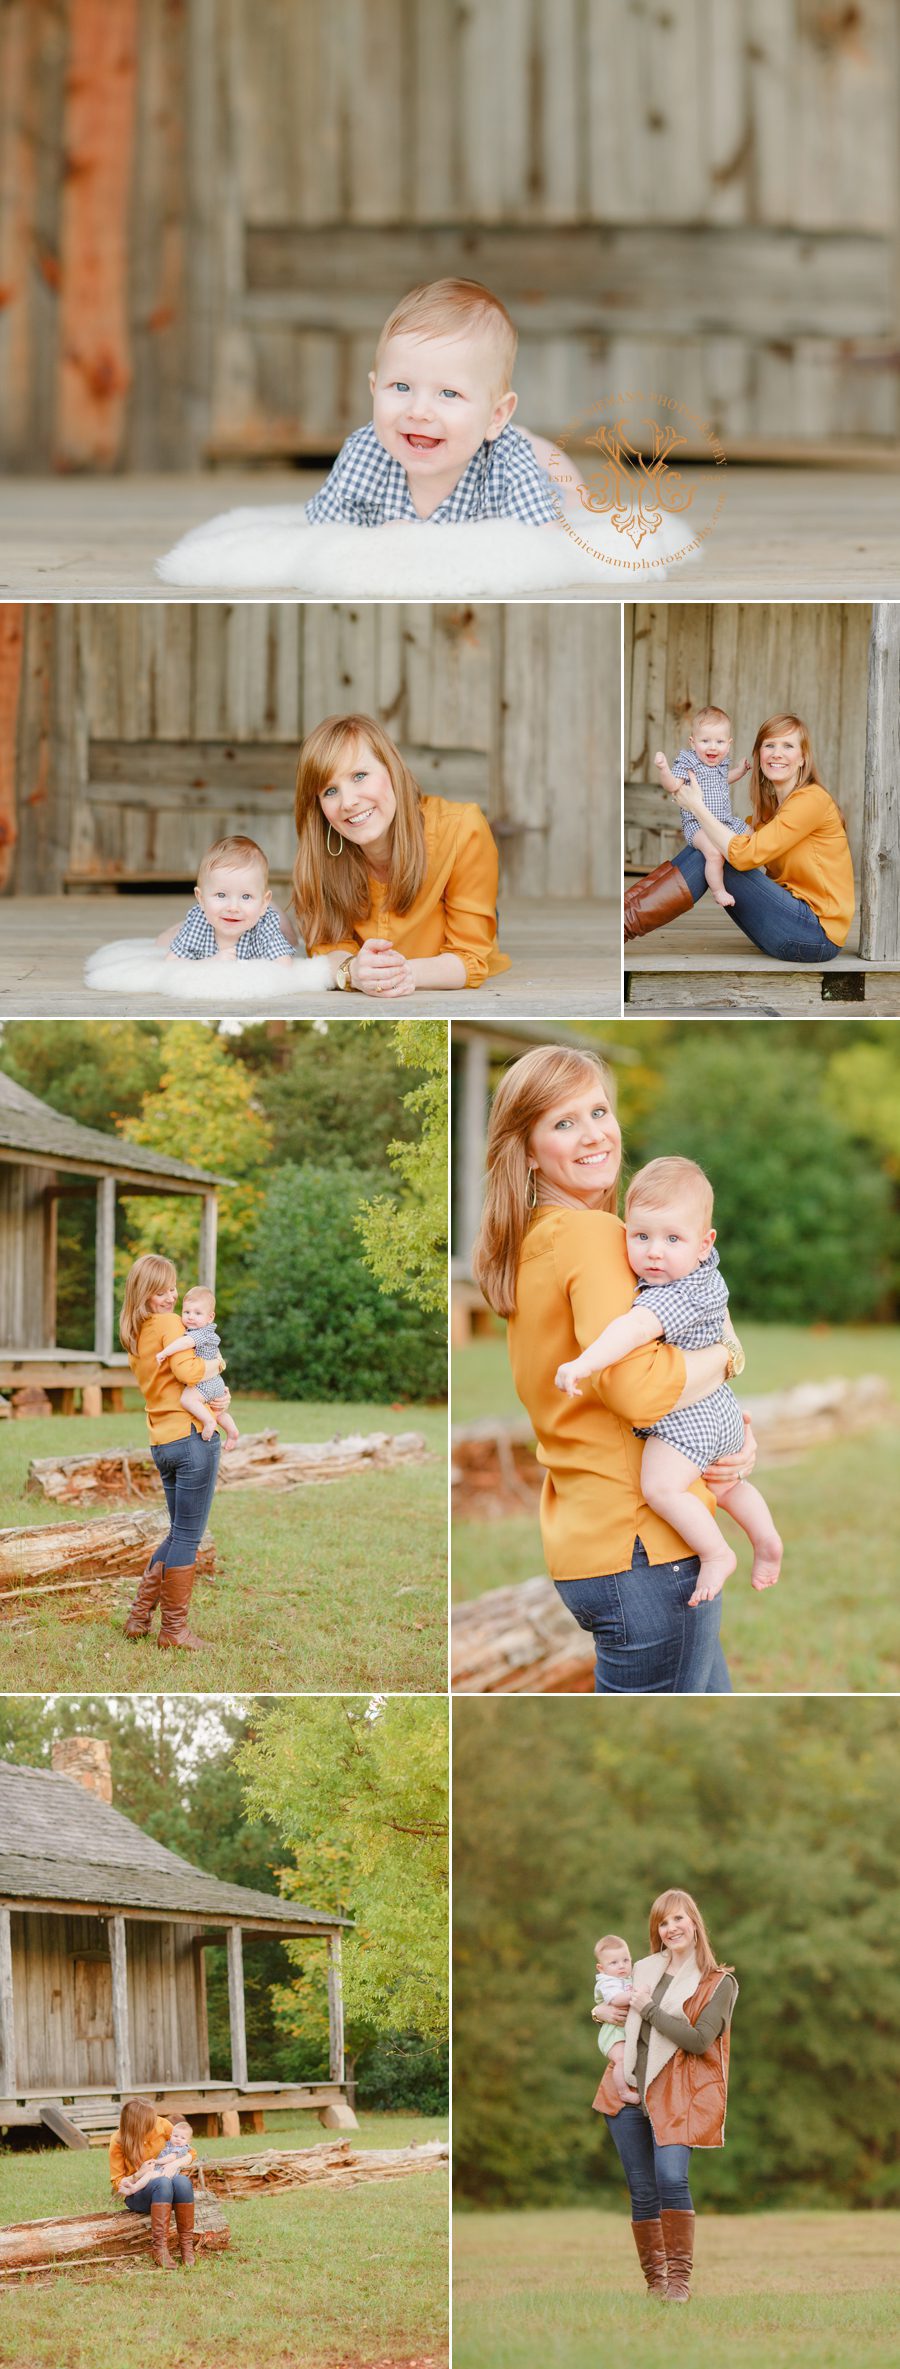 Fall portraits in Athens, GA area on a farm with mother and baby boy.